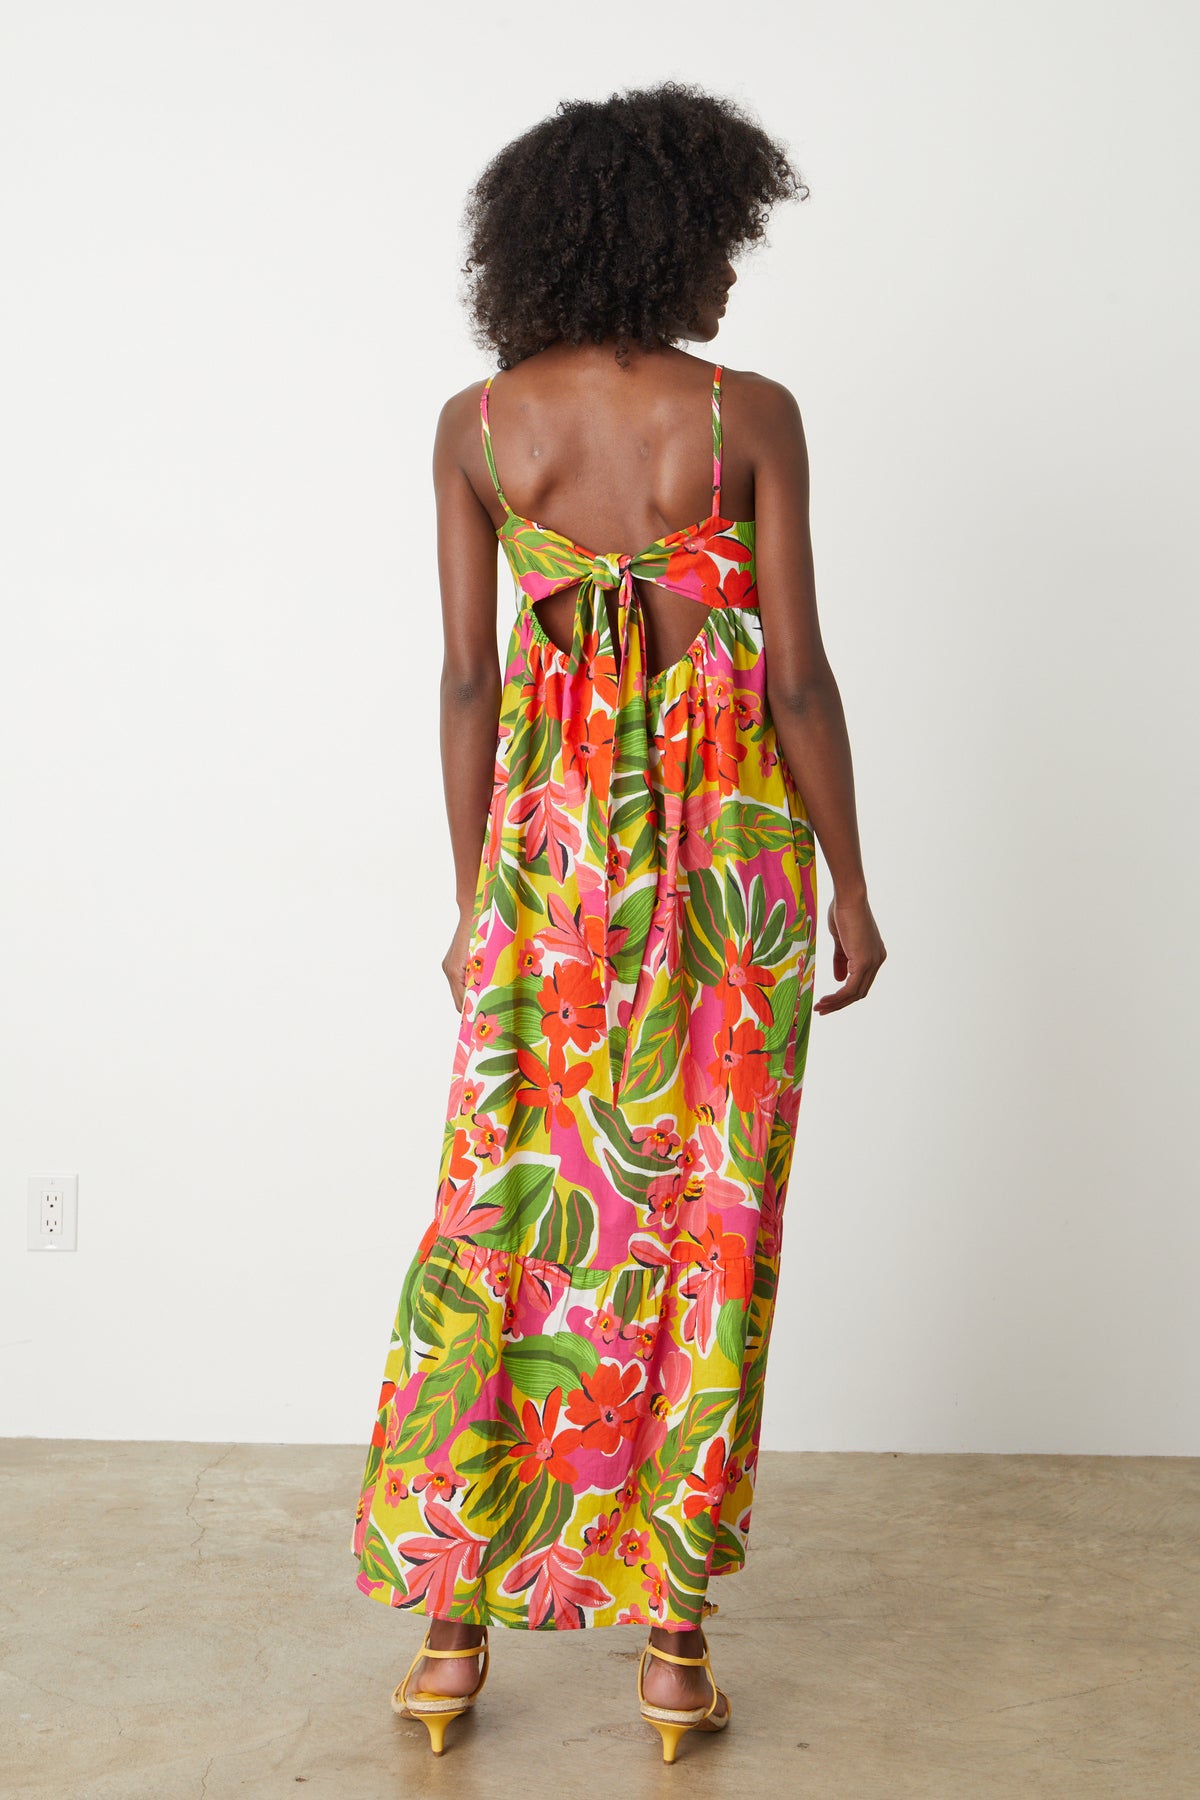 The back view of a woman wearing a Velvet by Graham & Spencer Kayla printed maxi dress.-26774872981697